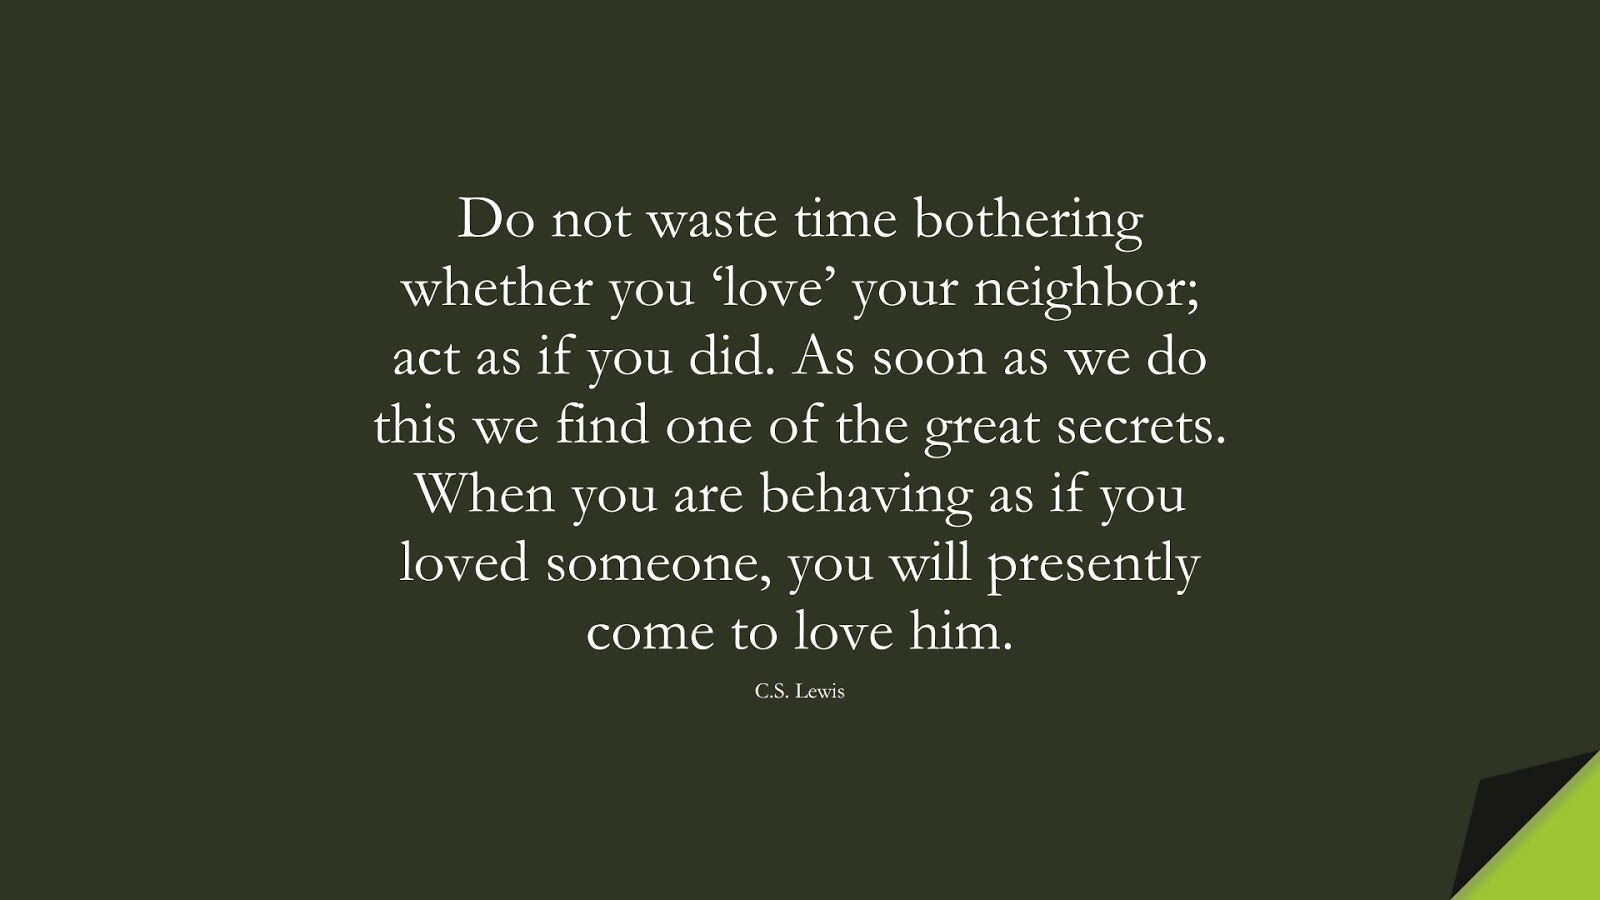 Do not waste time bothering whether you ‘love’ your neighbor; act as if you did. As soon as we do this we find one of the great secrets. When you are behaving as if you loved someone, you will presently come to love him. (C.S. Lewis);  #RelationshipQuotes